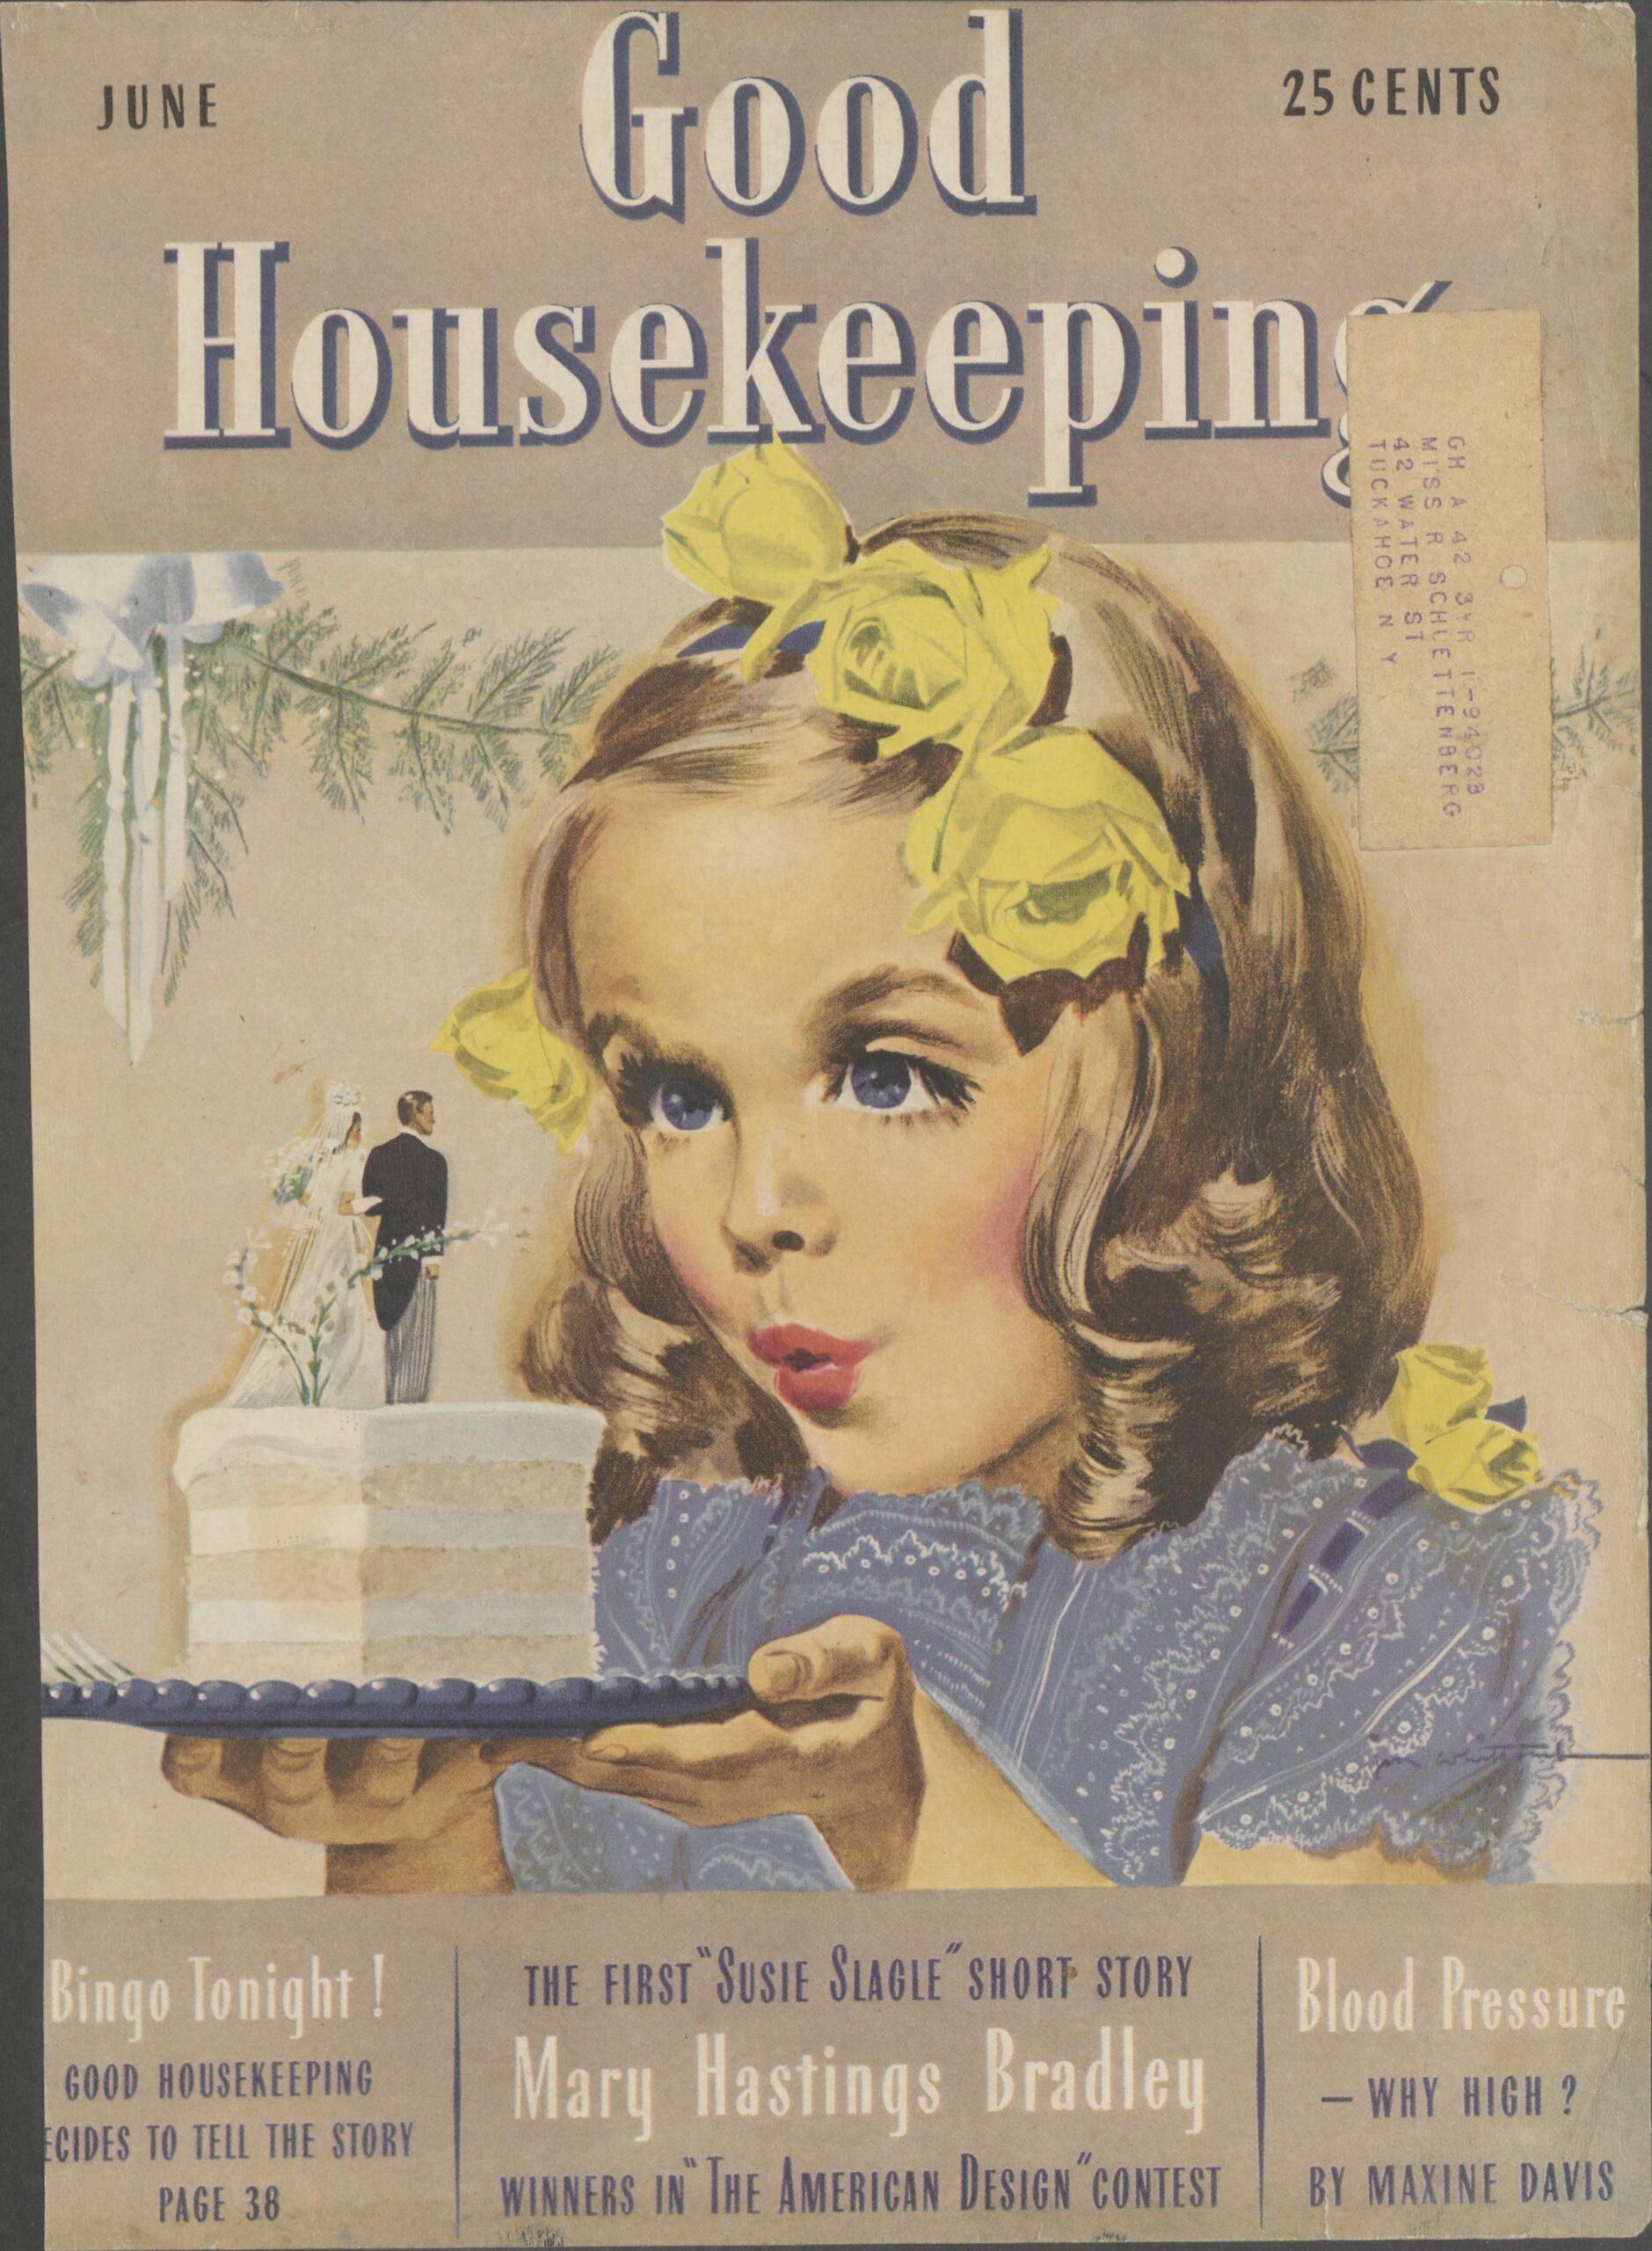 A Good Housekeeping cover from 1940 that shows a blond girl eyeing a piece of wedding cake with a bride and groom on top